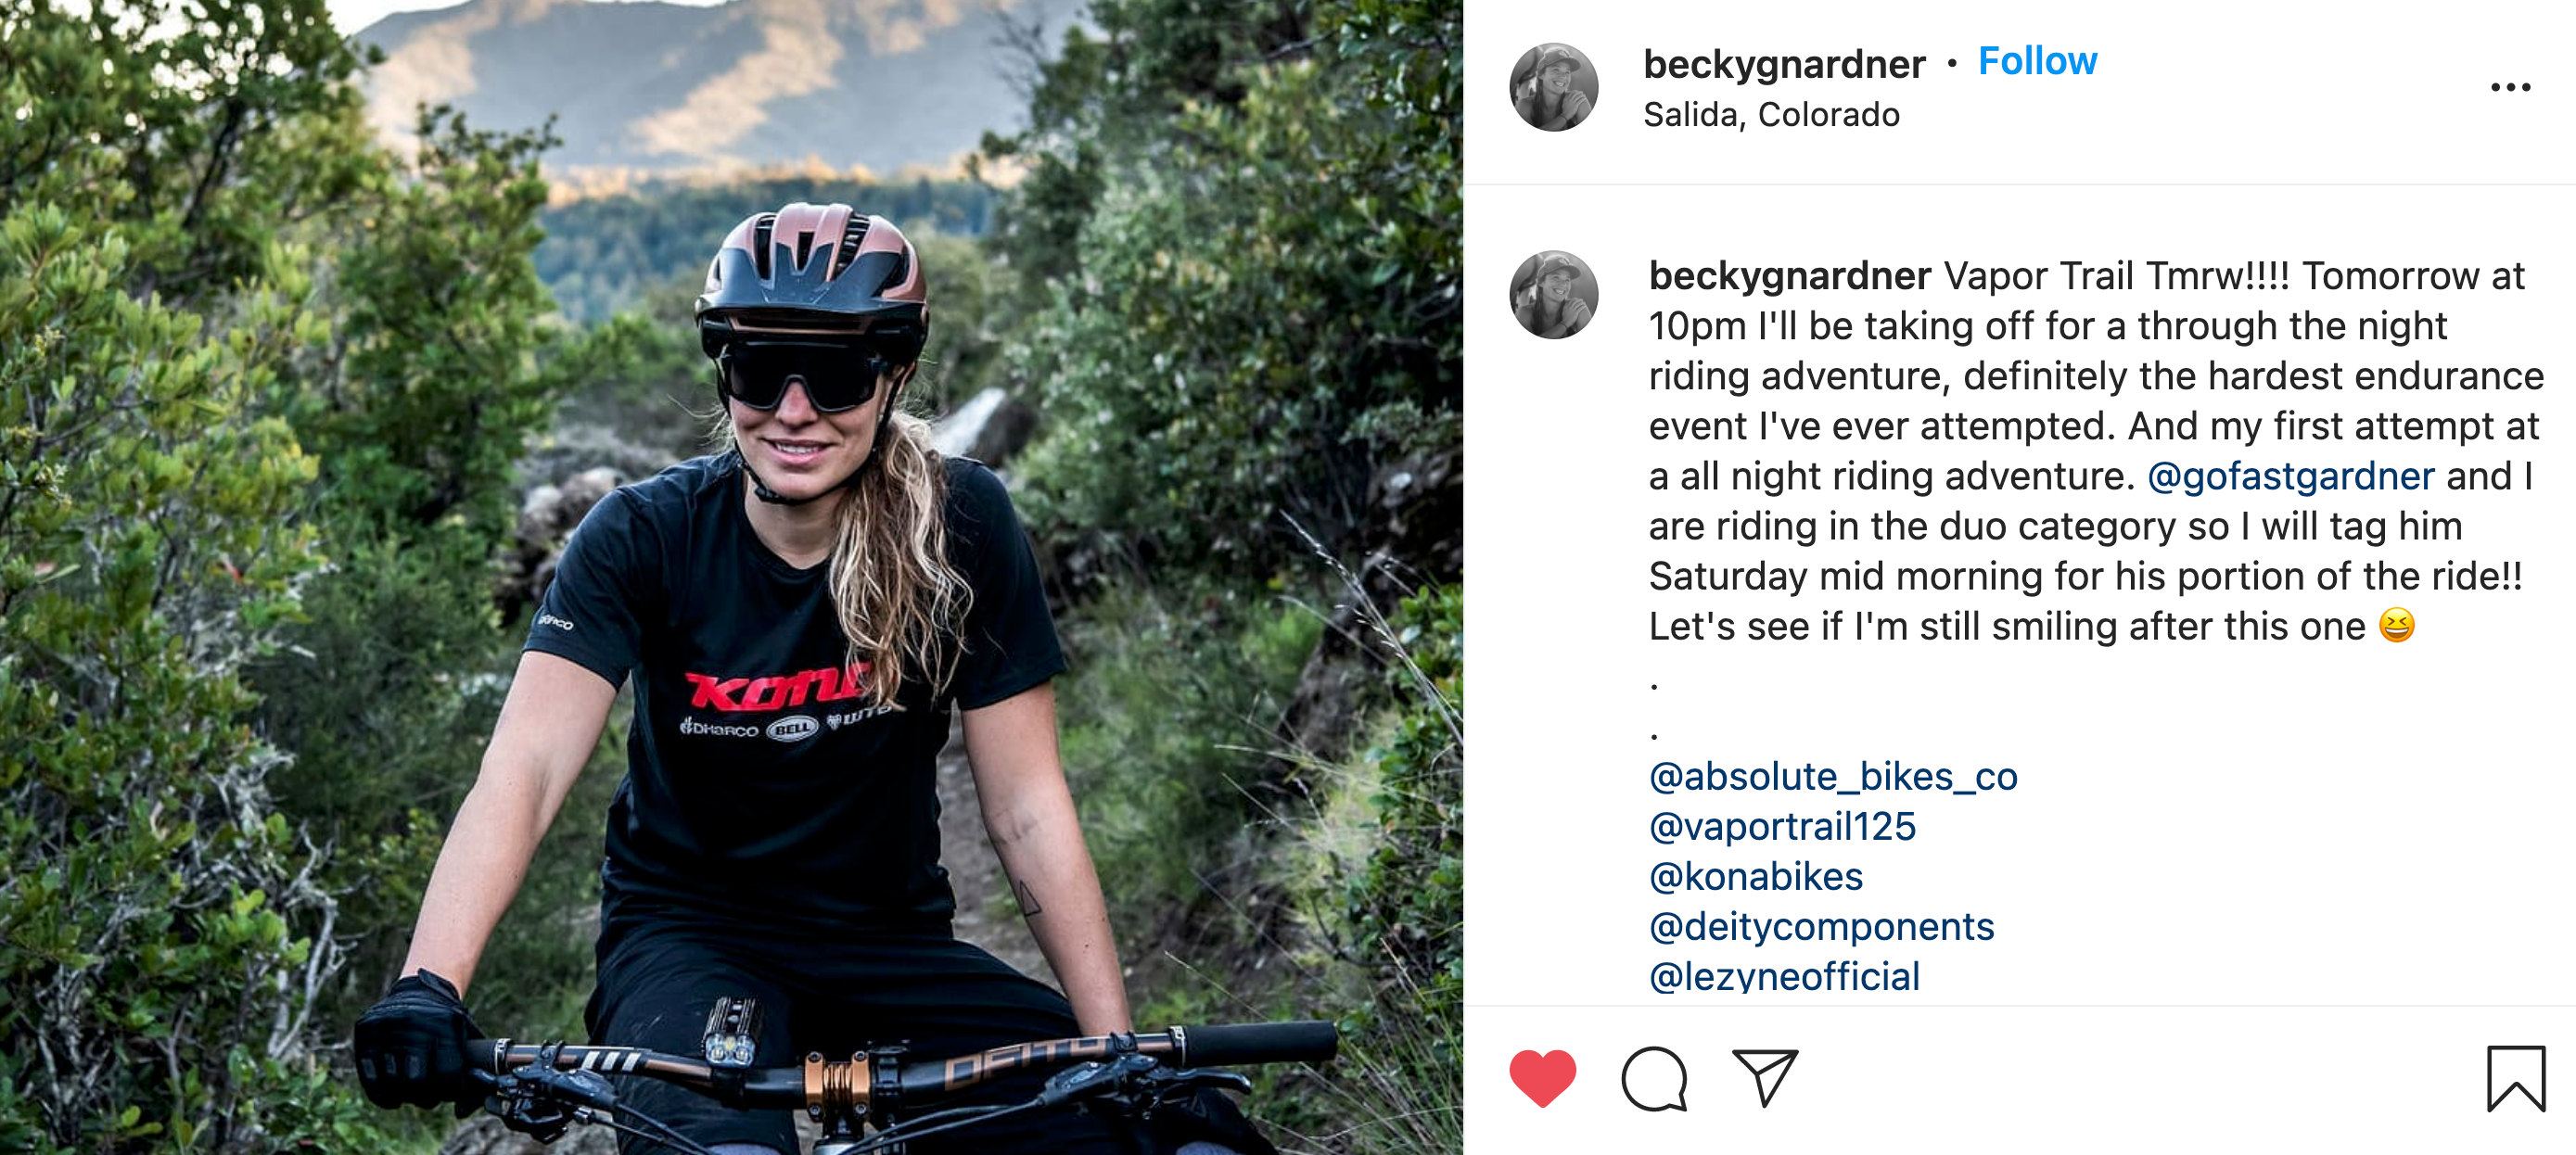 Becky's instagram post announcing her night riding adventure